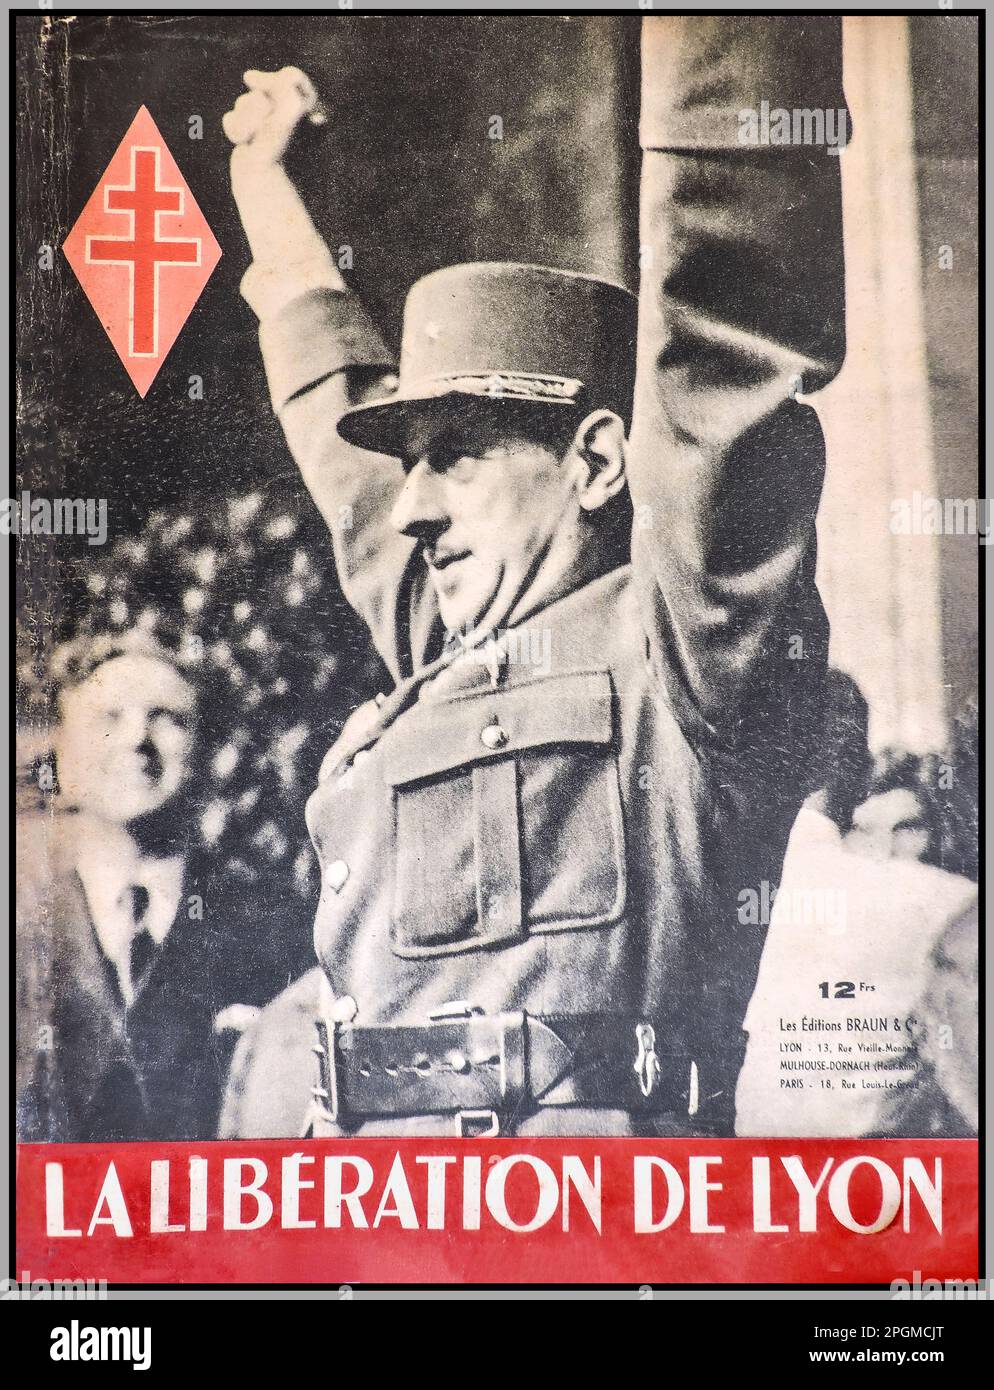 WW2 LYON France French Liberation General De Gaulle in uniform celebrates 'LA LIBERATION DE LYON' in Southern France, from the occupation of Nazi Germany. Emblem of The Cross of Lorraine the symbol of Free  France during World War II  is printed on this magazine front cover priced at 12 frs. Stock Photo